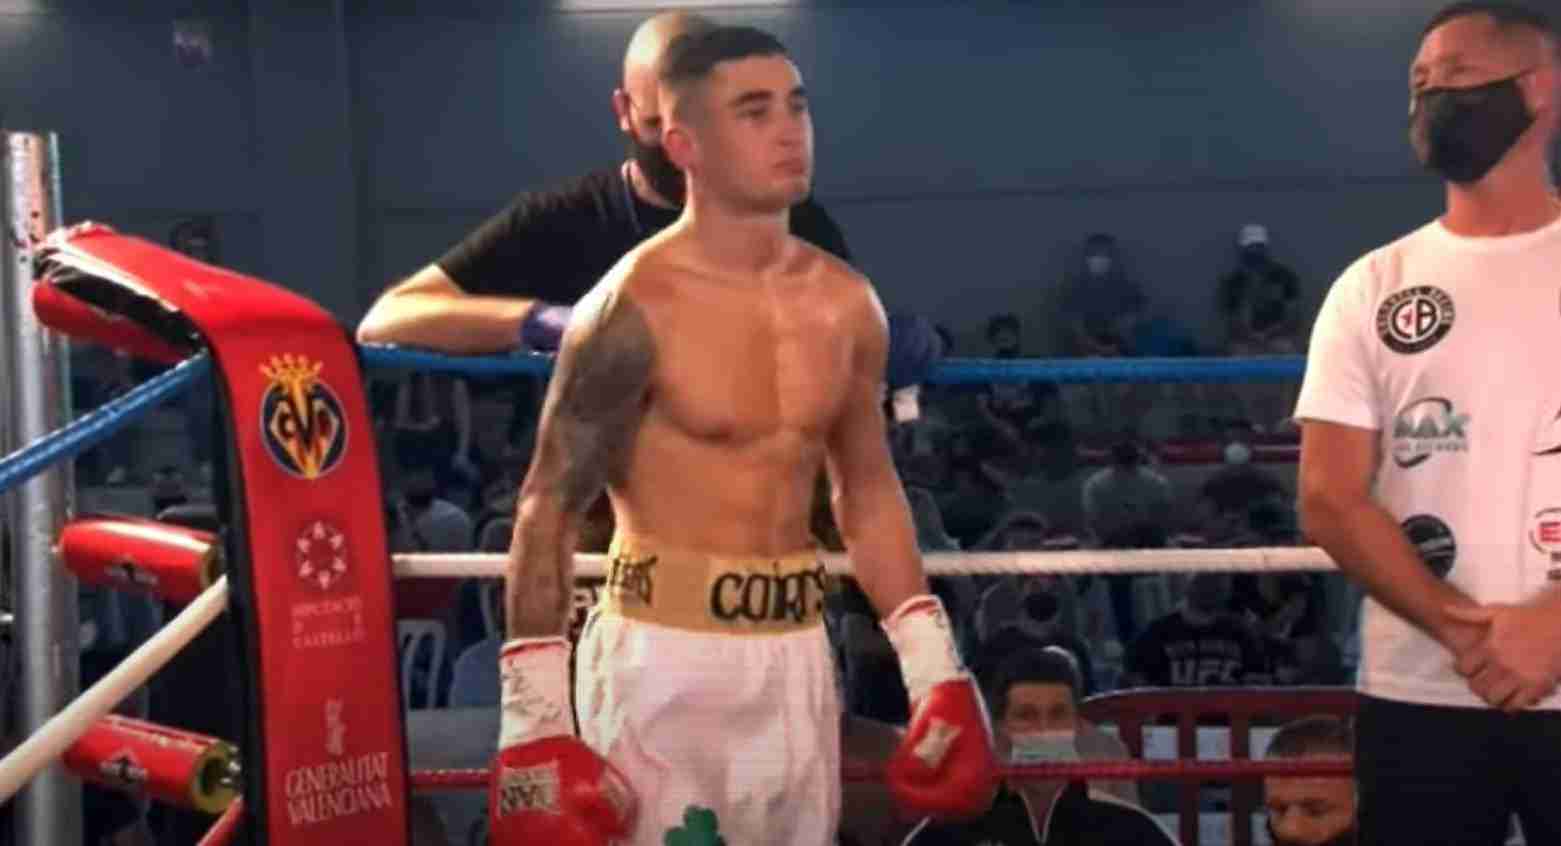 Young Irishman strikes new deal amid worldwide boxing expansion